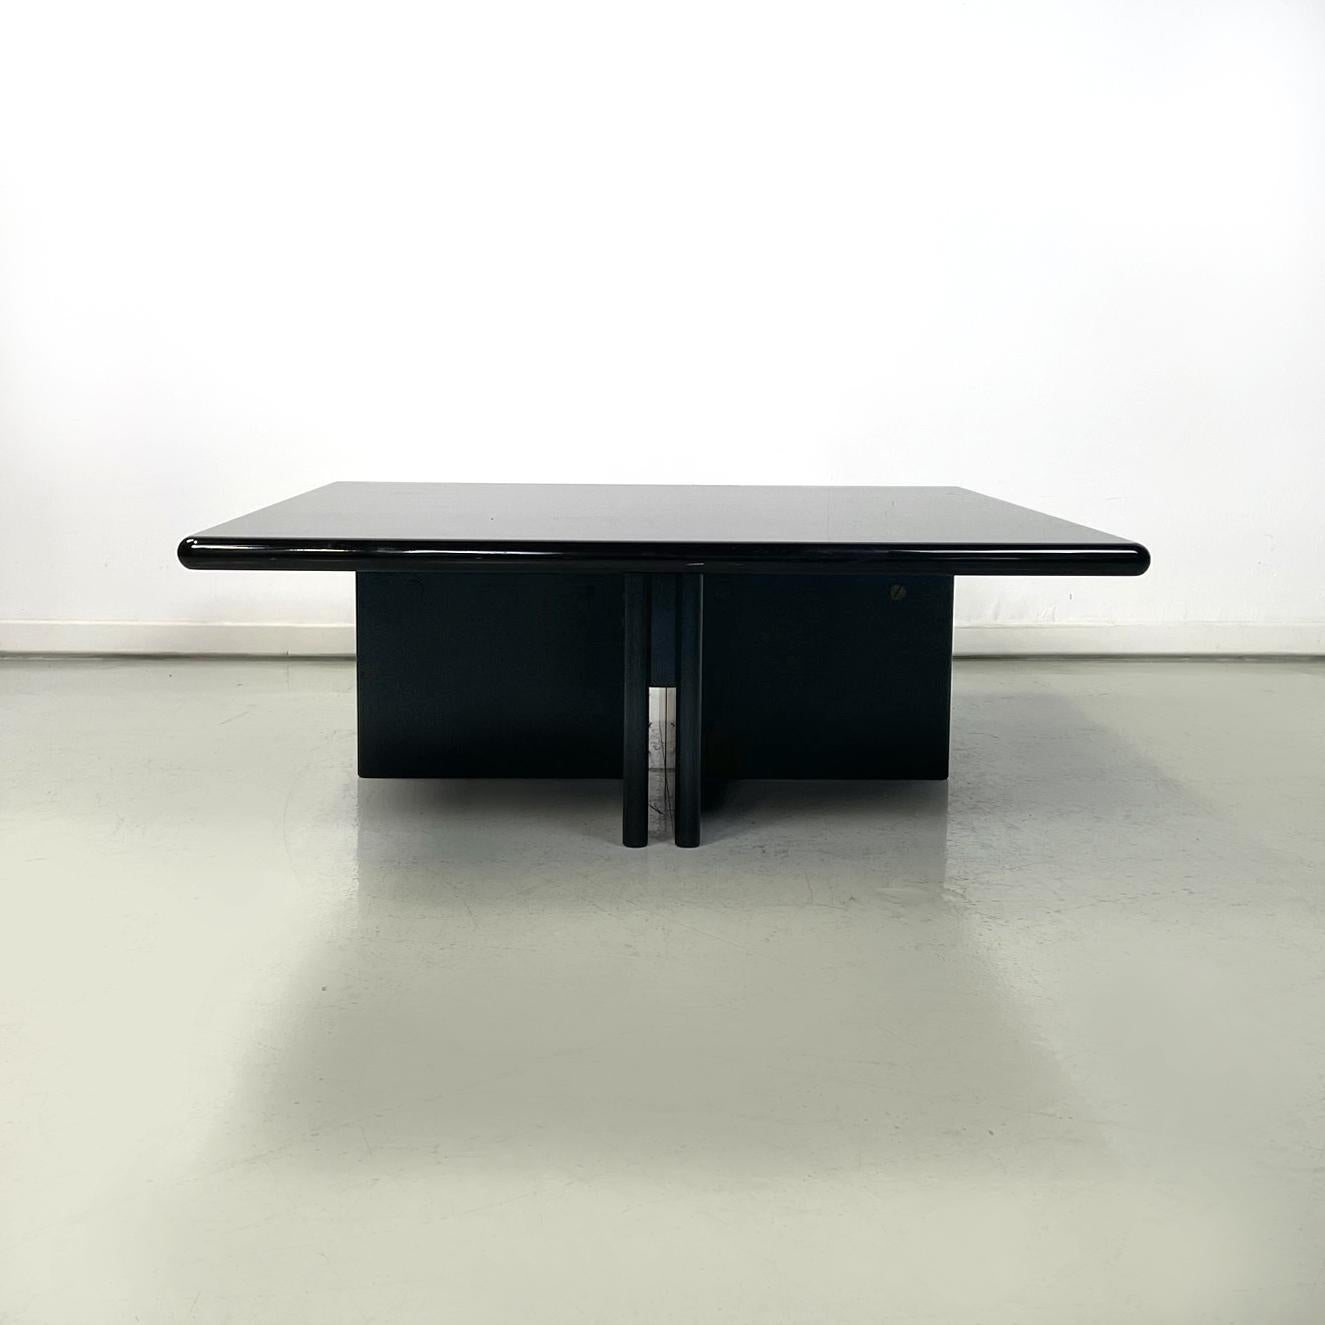 Italian modern squared coffee table in black lacquered wood, 1980s
Coffee table with square top and rounded corners, entirely in black lacquered wood. The legs are positioned crosswise and each one is made up of two vertical wooden